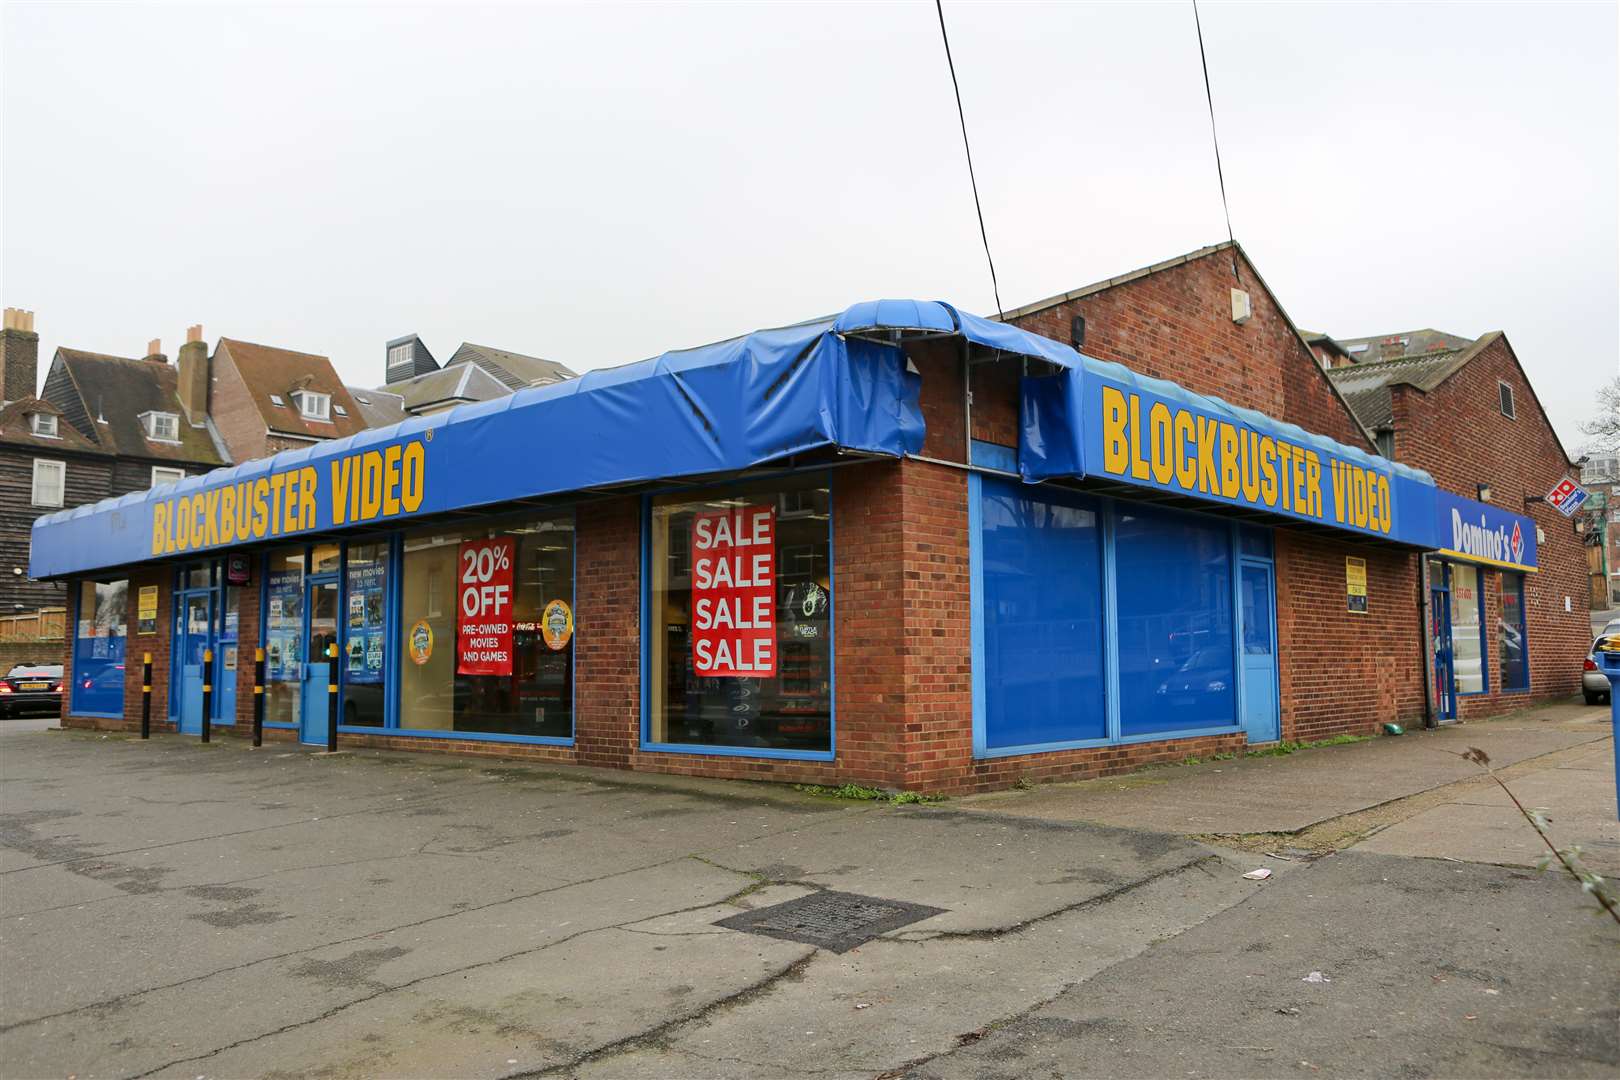 The site as it was when it was a Blockbuster store